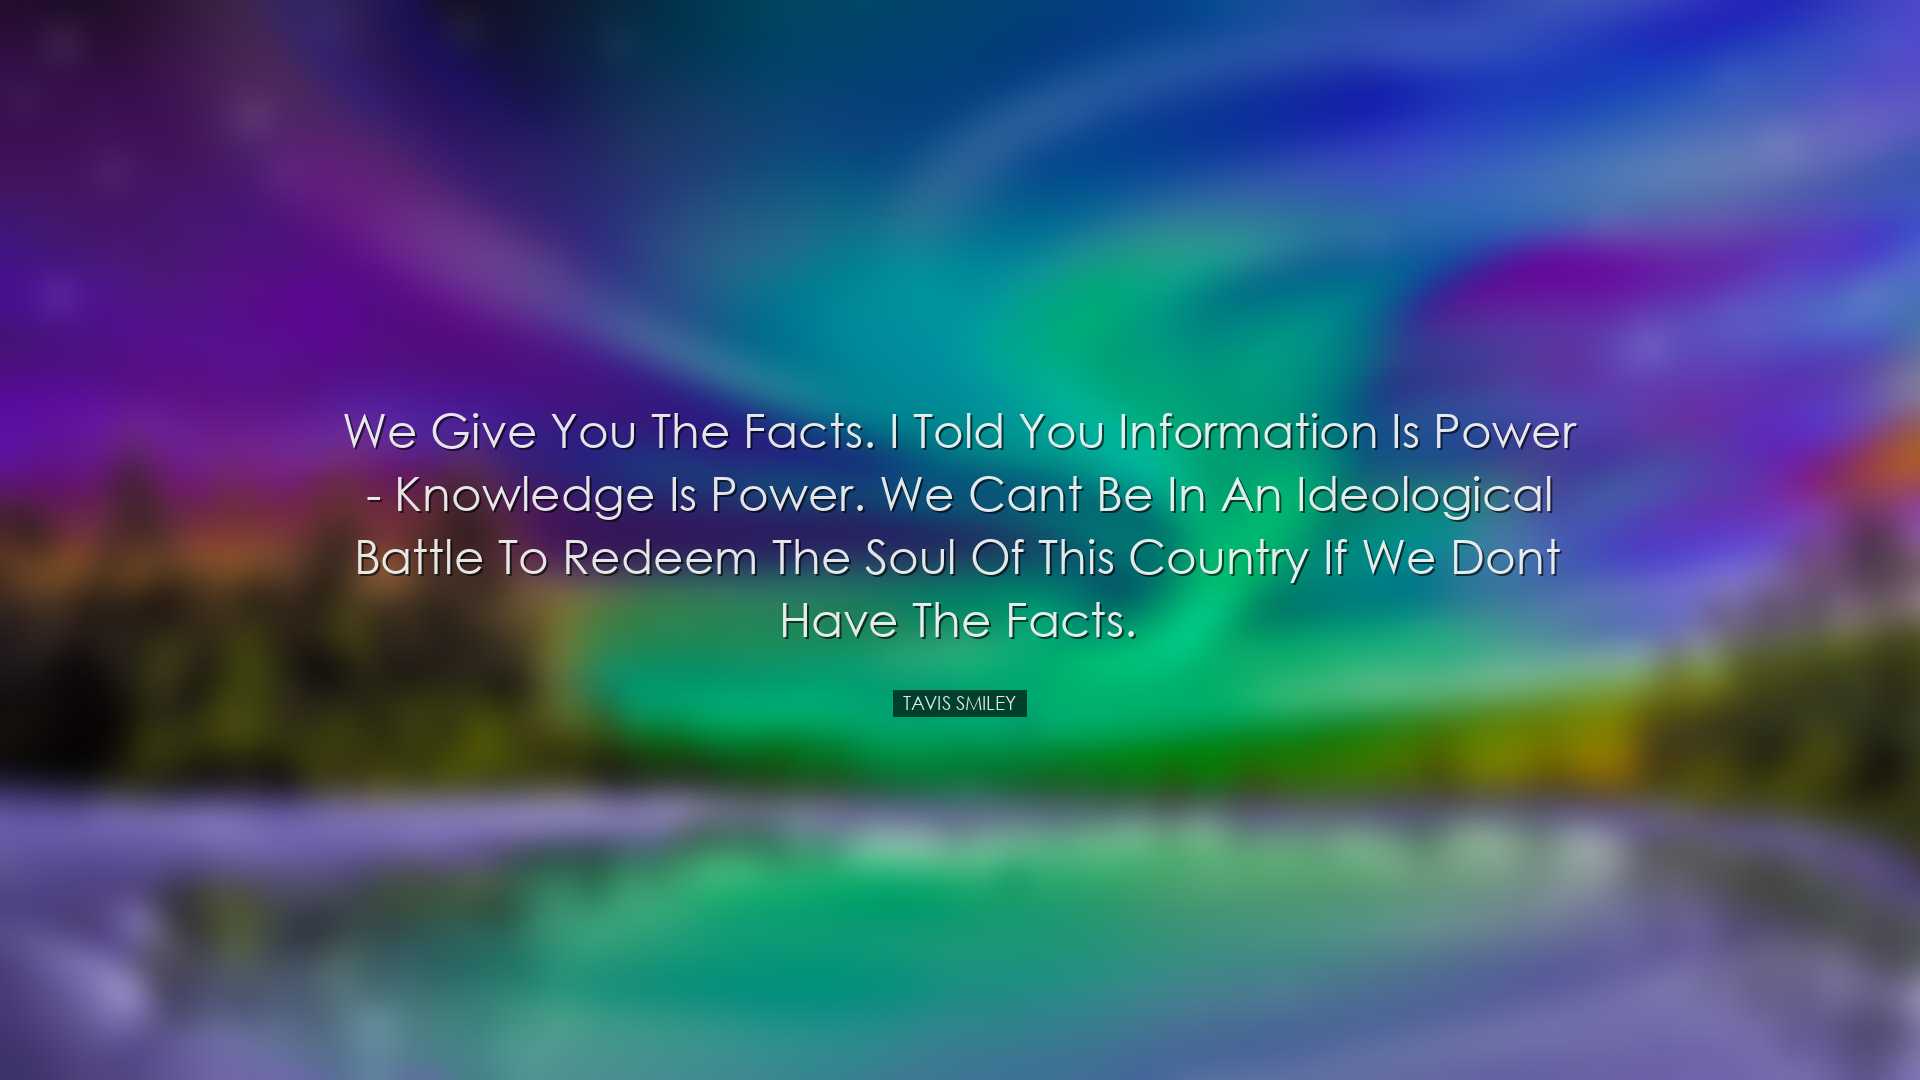 We give you the facts. I told you information is power - knowledge